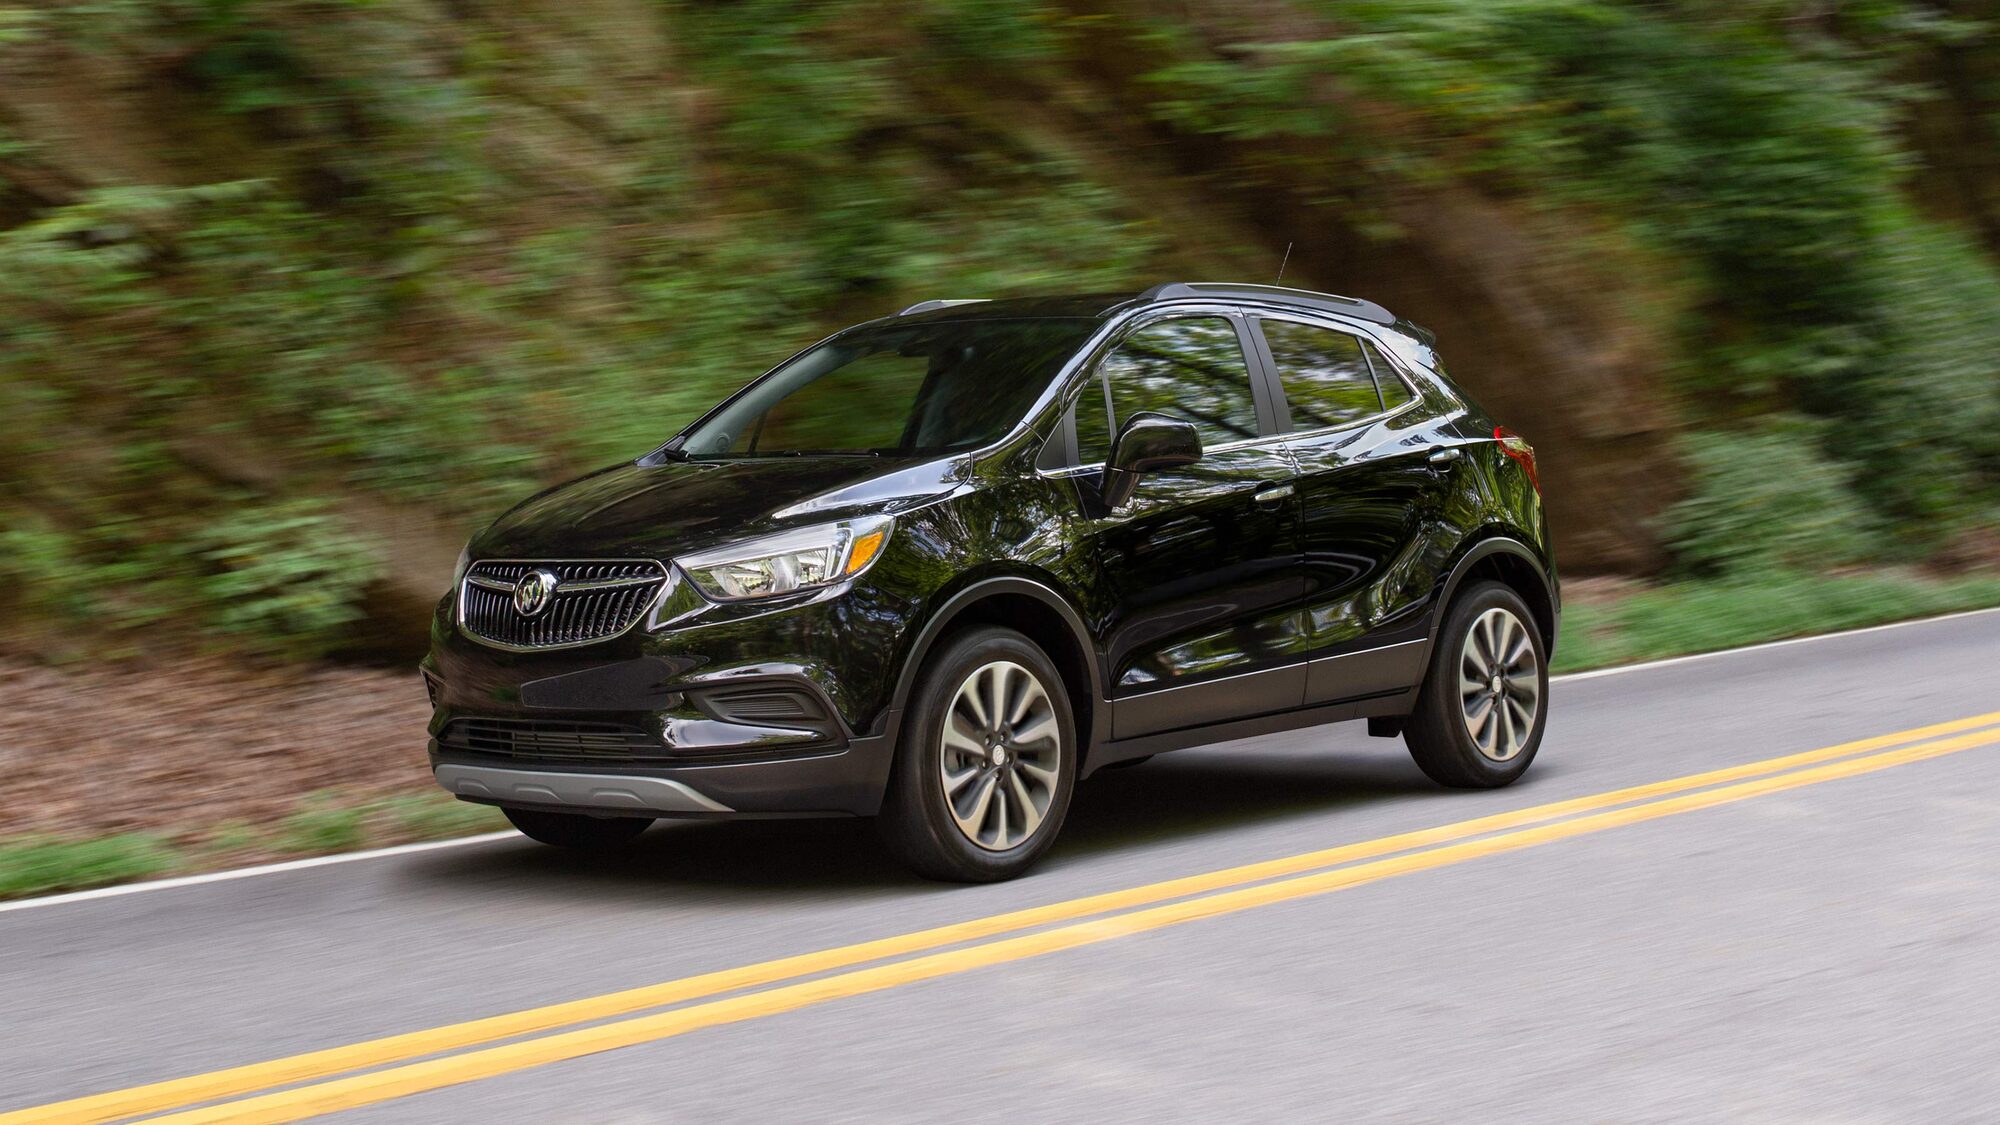 The 2022 Buick Encore is just affordable as the Kia Sportage and the Honda HRV. You can only get a new or used SUV at your Courtesy Buick GMC car dealership.